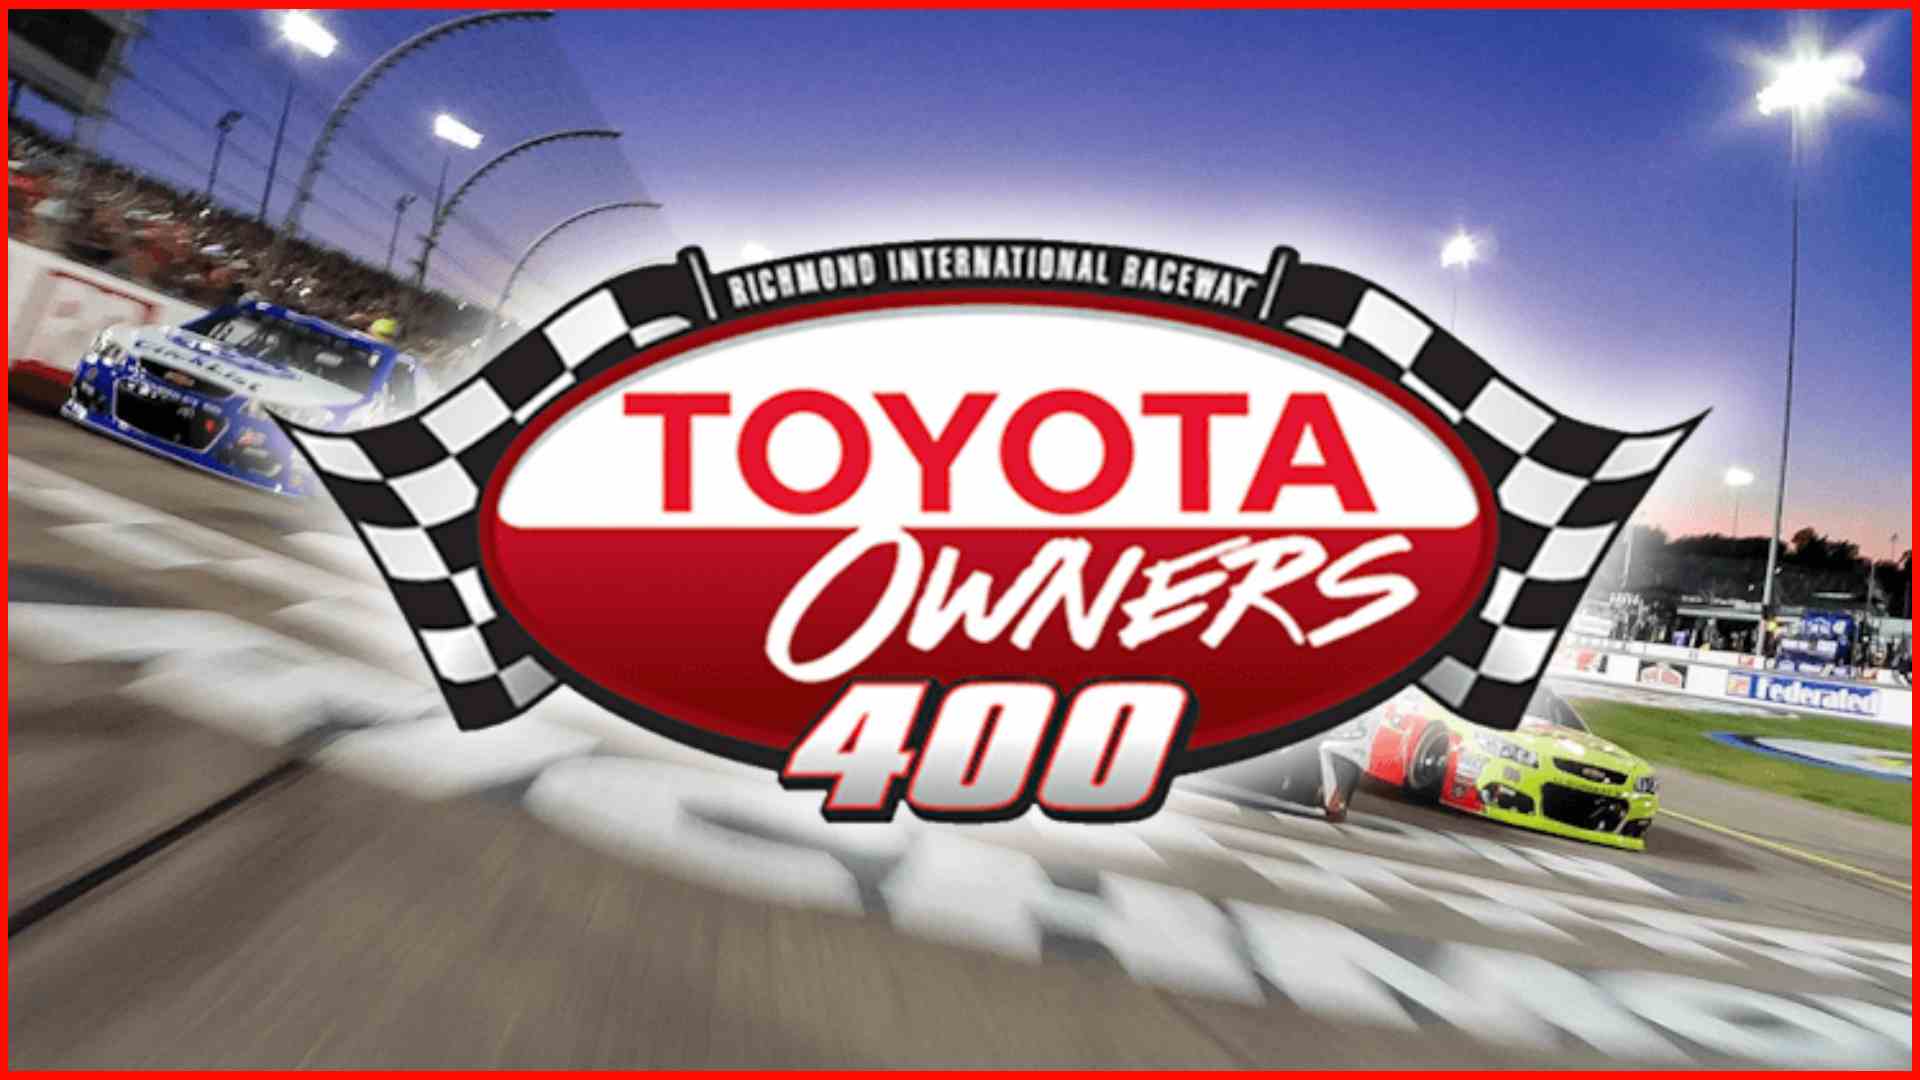 Toyota Owners 400 NASCAR feature